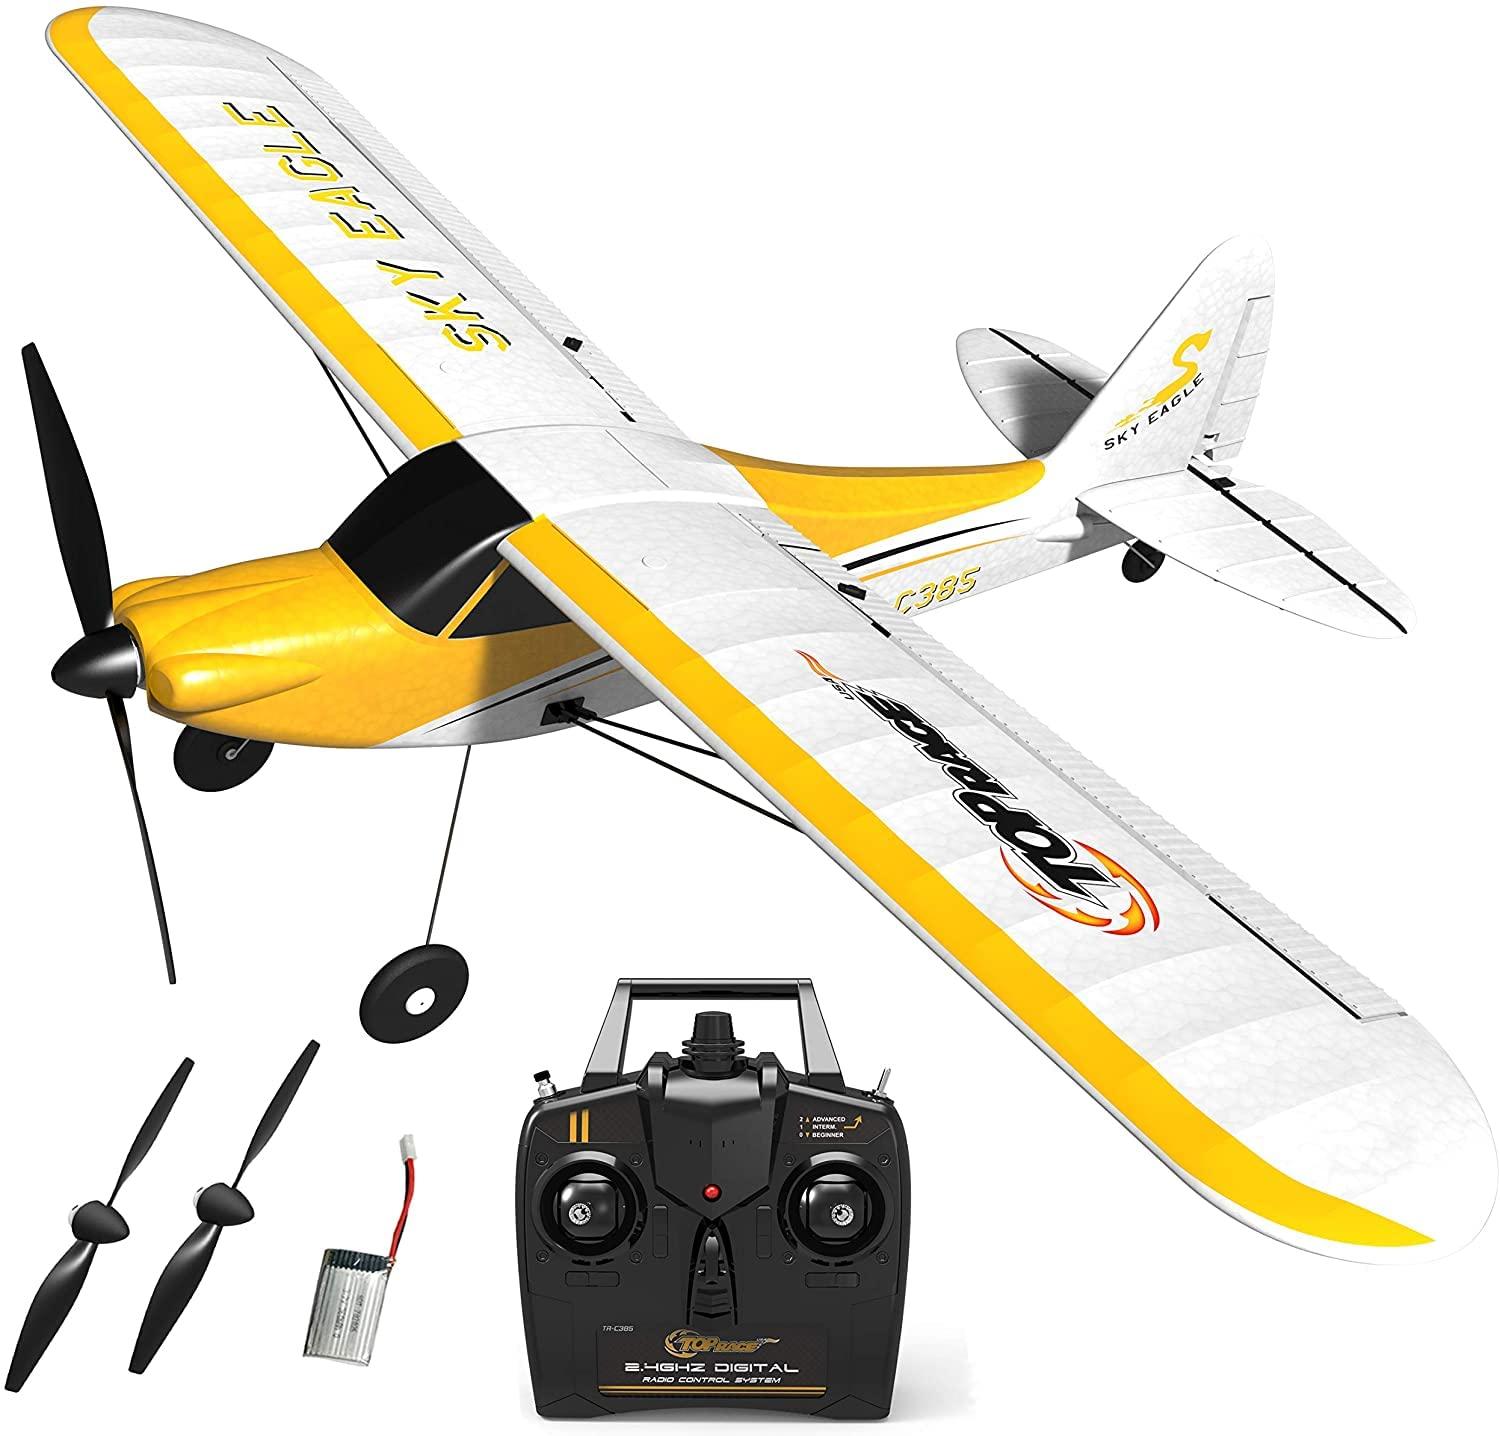 Rc Model Planes For Sale: Types, Power Sources, and Sizes of RC Model Planes for Sale